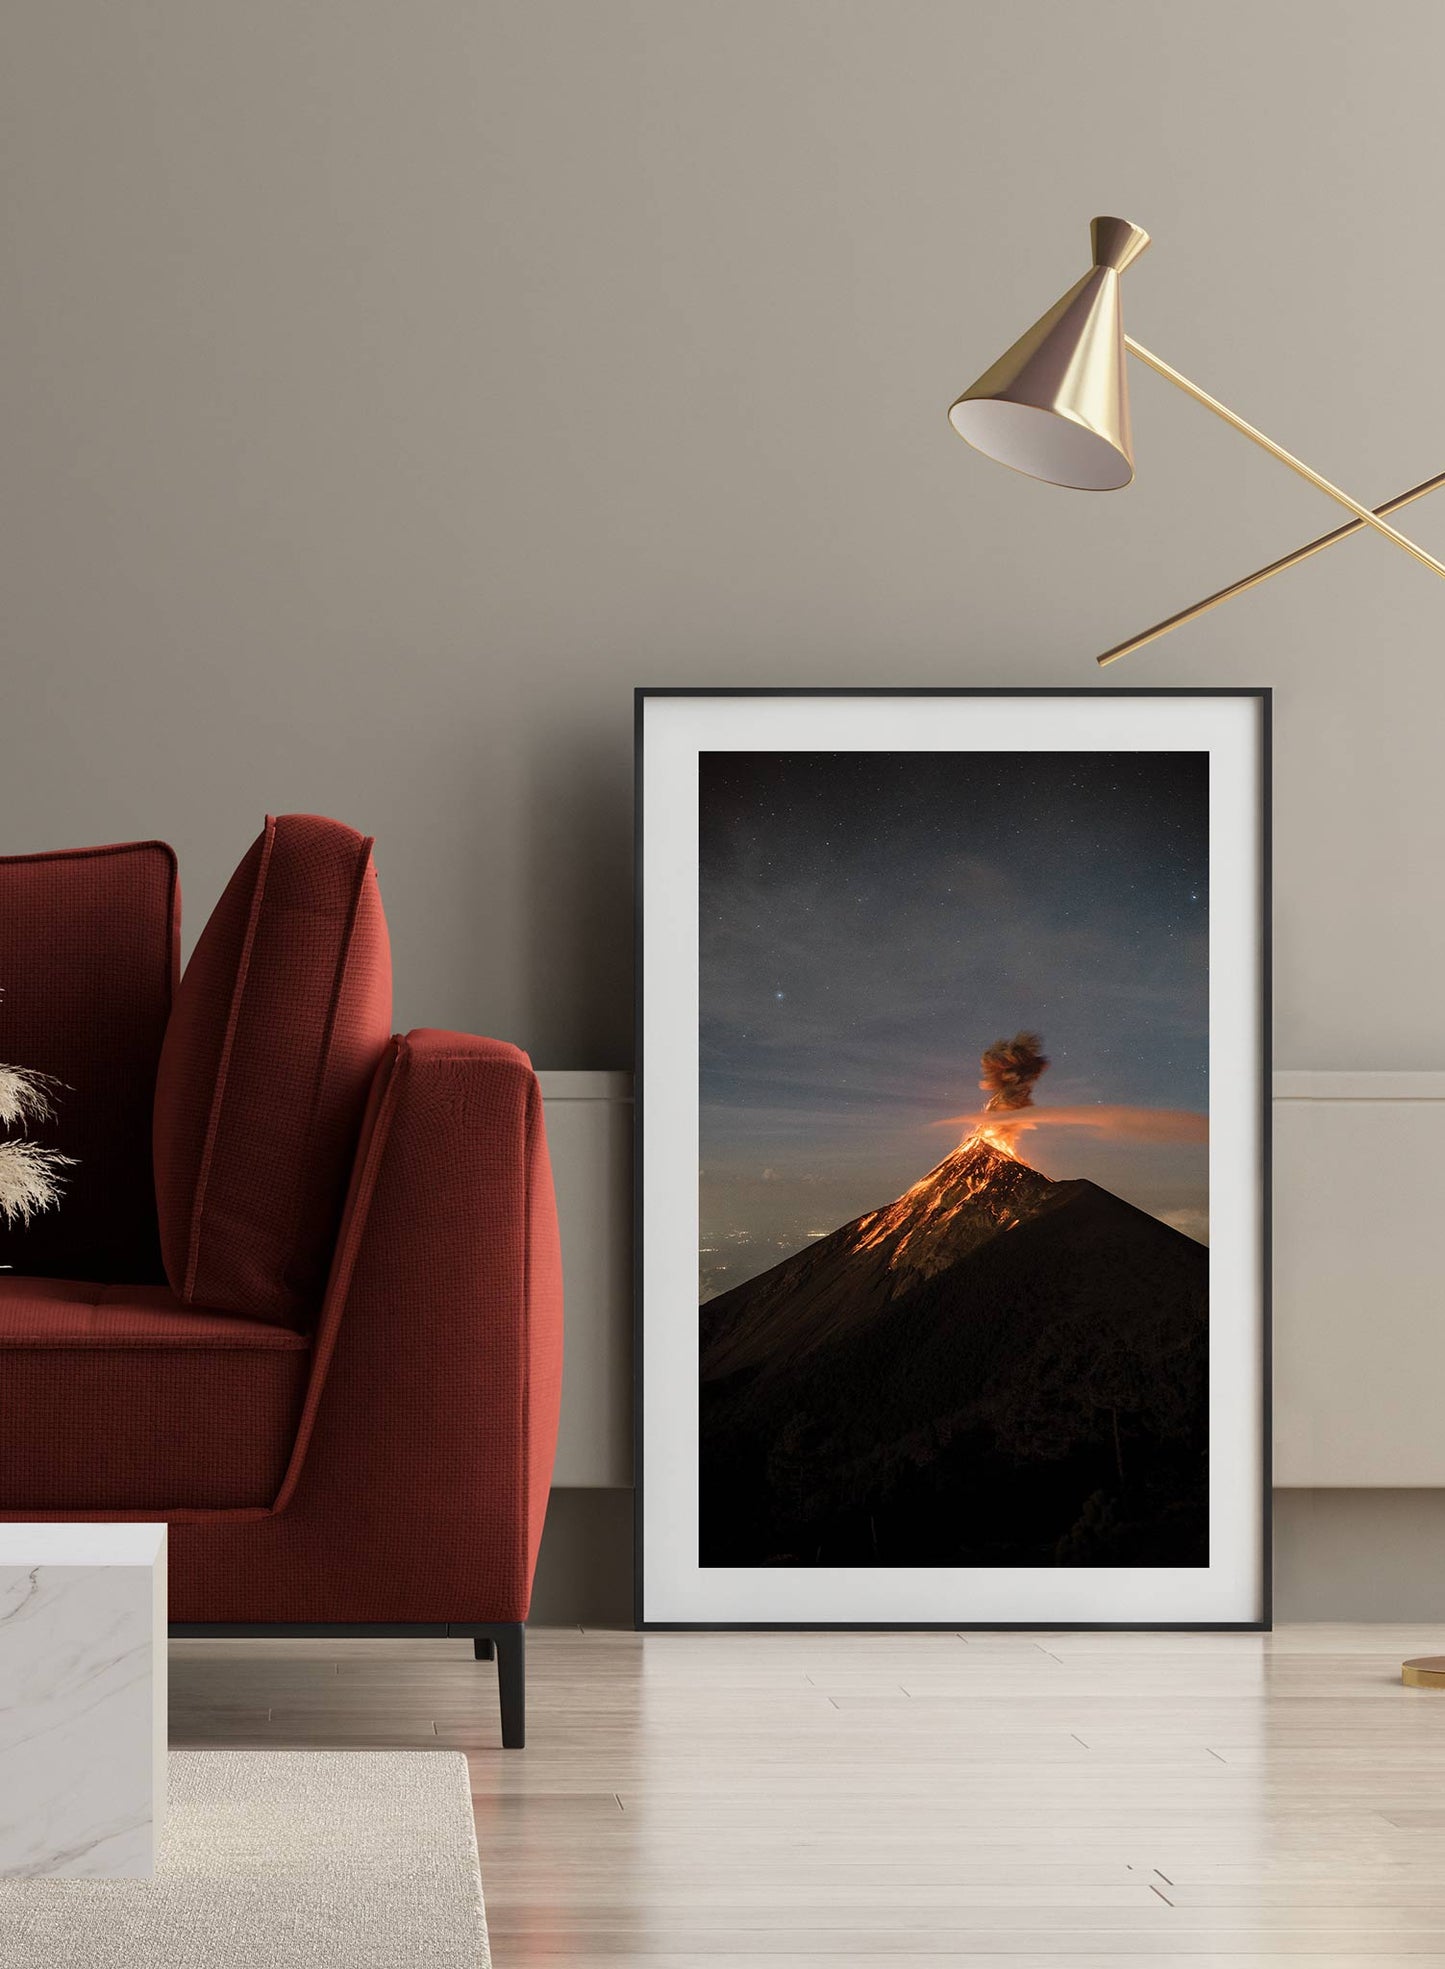 Grandiose Eruption' is a rare landscape photography poster by Opposite Wall of an erupting volcano in Guatemala.